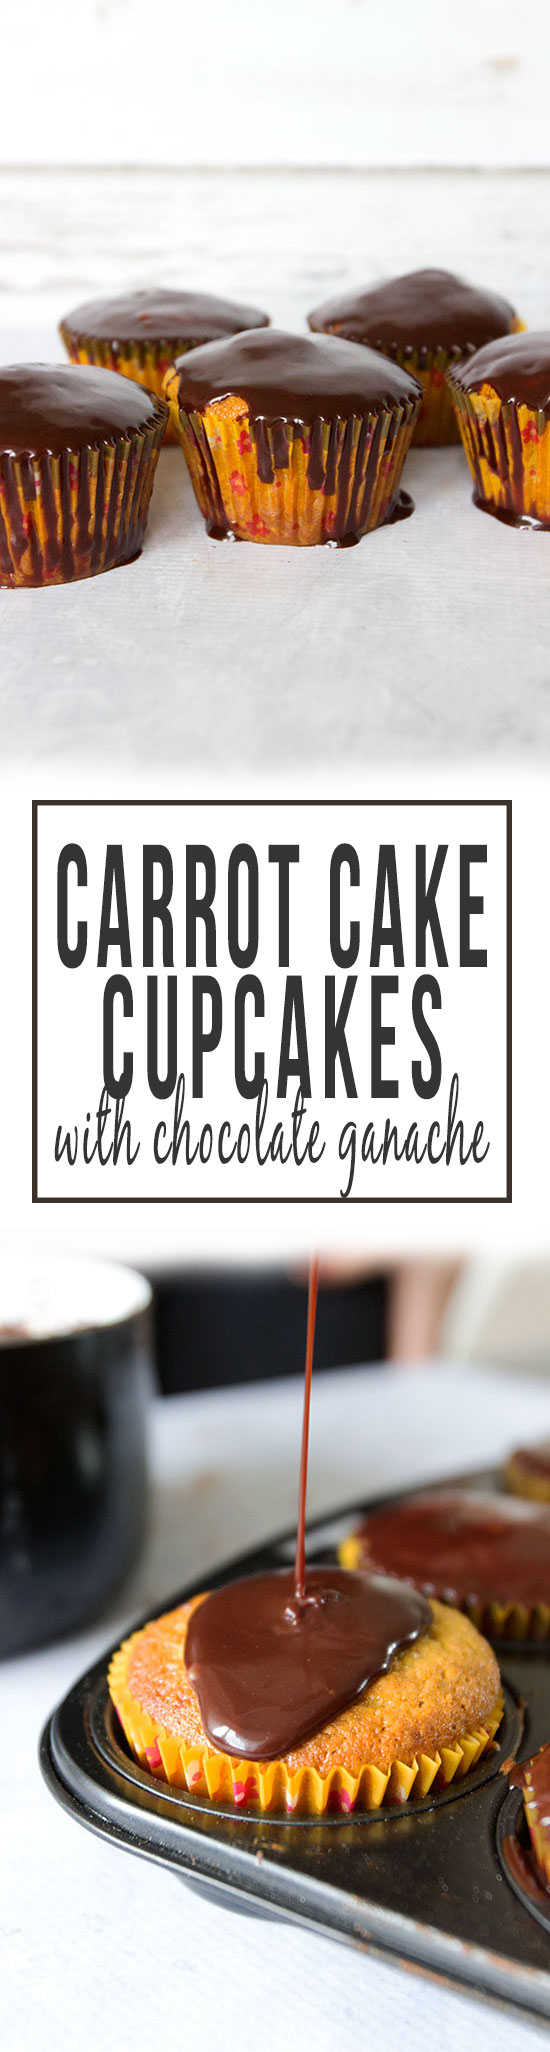 Blender Carrot Cake Cupcakes with Chocolate Ganache via www.sprinkleofgreen.com | These gluten free carrot cake cupcakes are moist and delicious with a luscious chocolate ganache glaze!